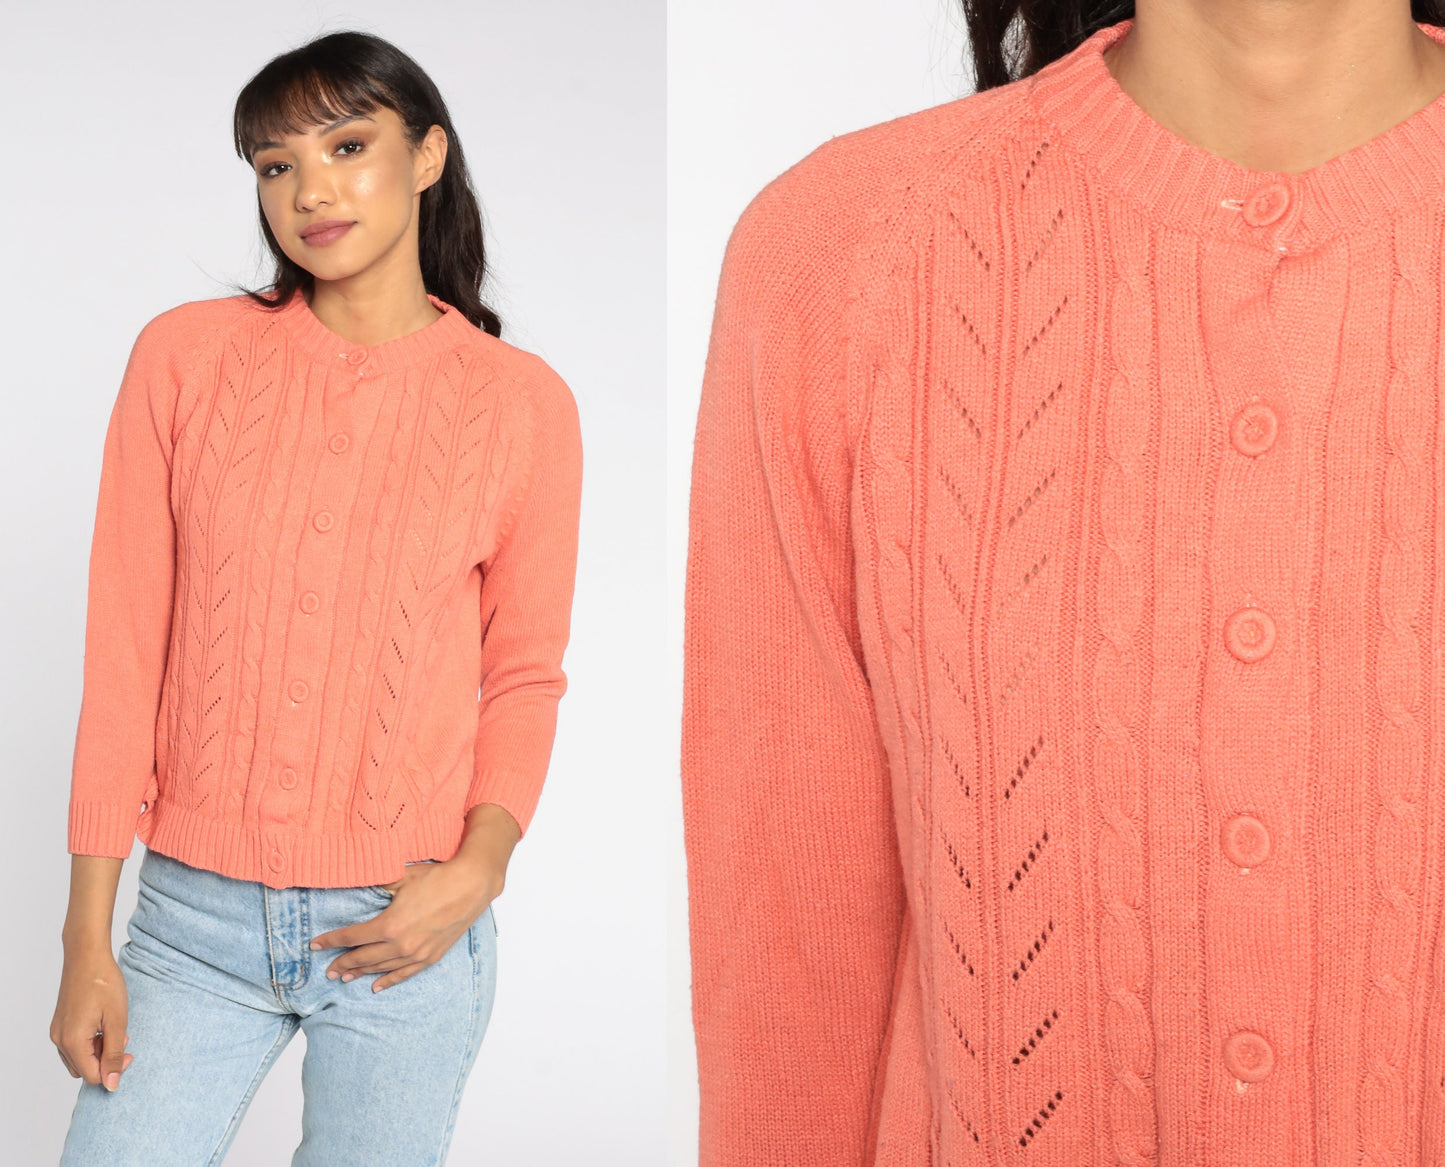 Salmon Pink Cable Knit Cardigan 70s Boho Sweater Grandma Sweater Cableknit Button Up 80s Vintage Bohemian 1970s Boho Small S